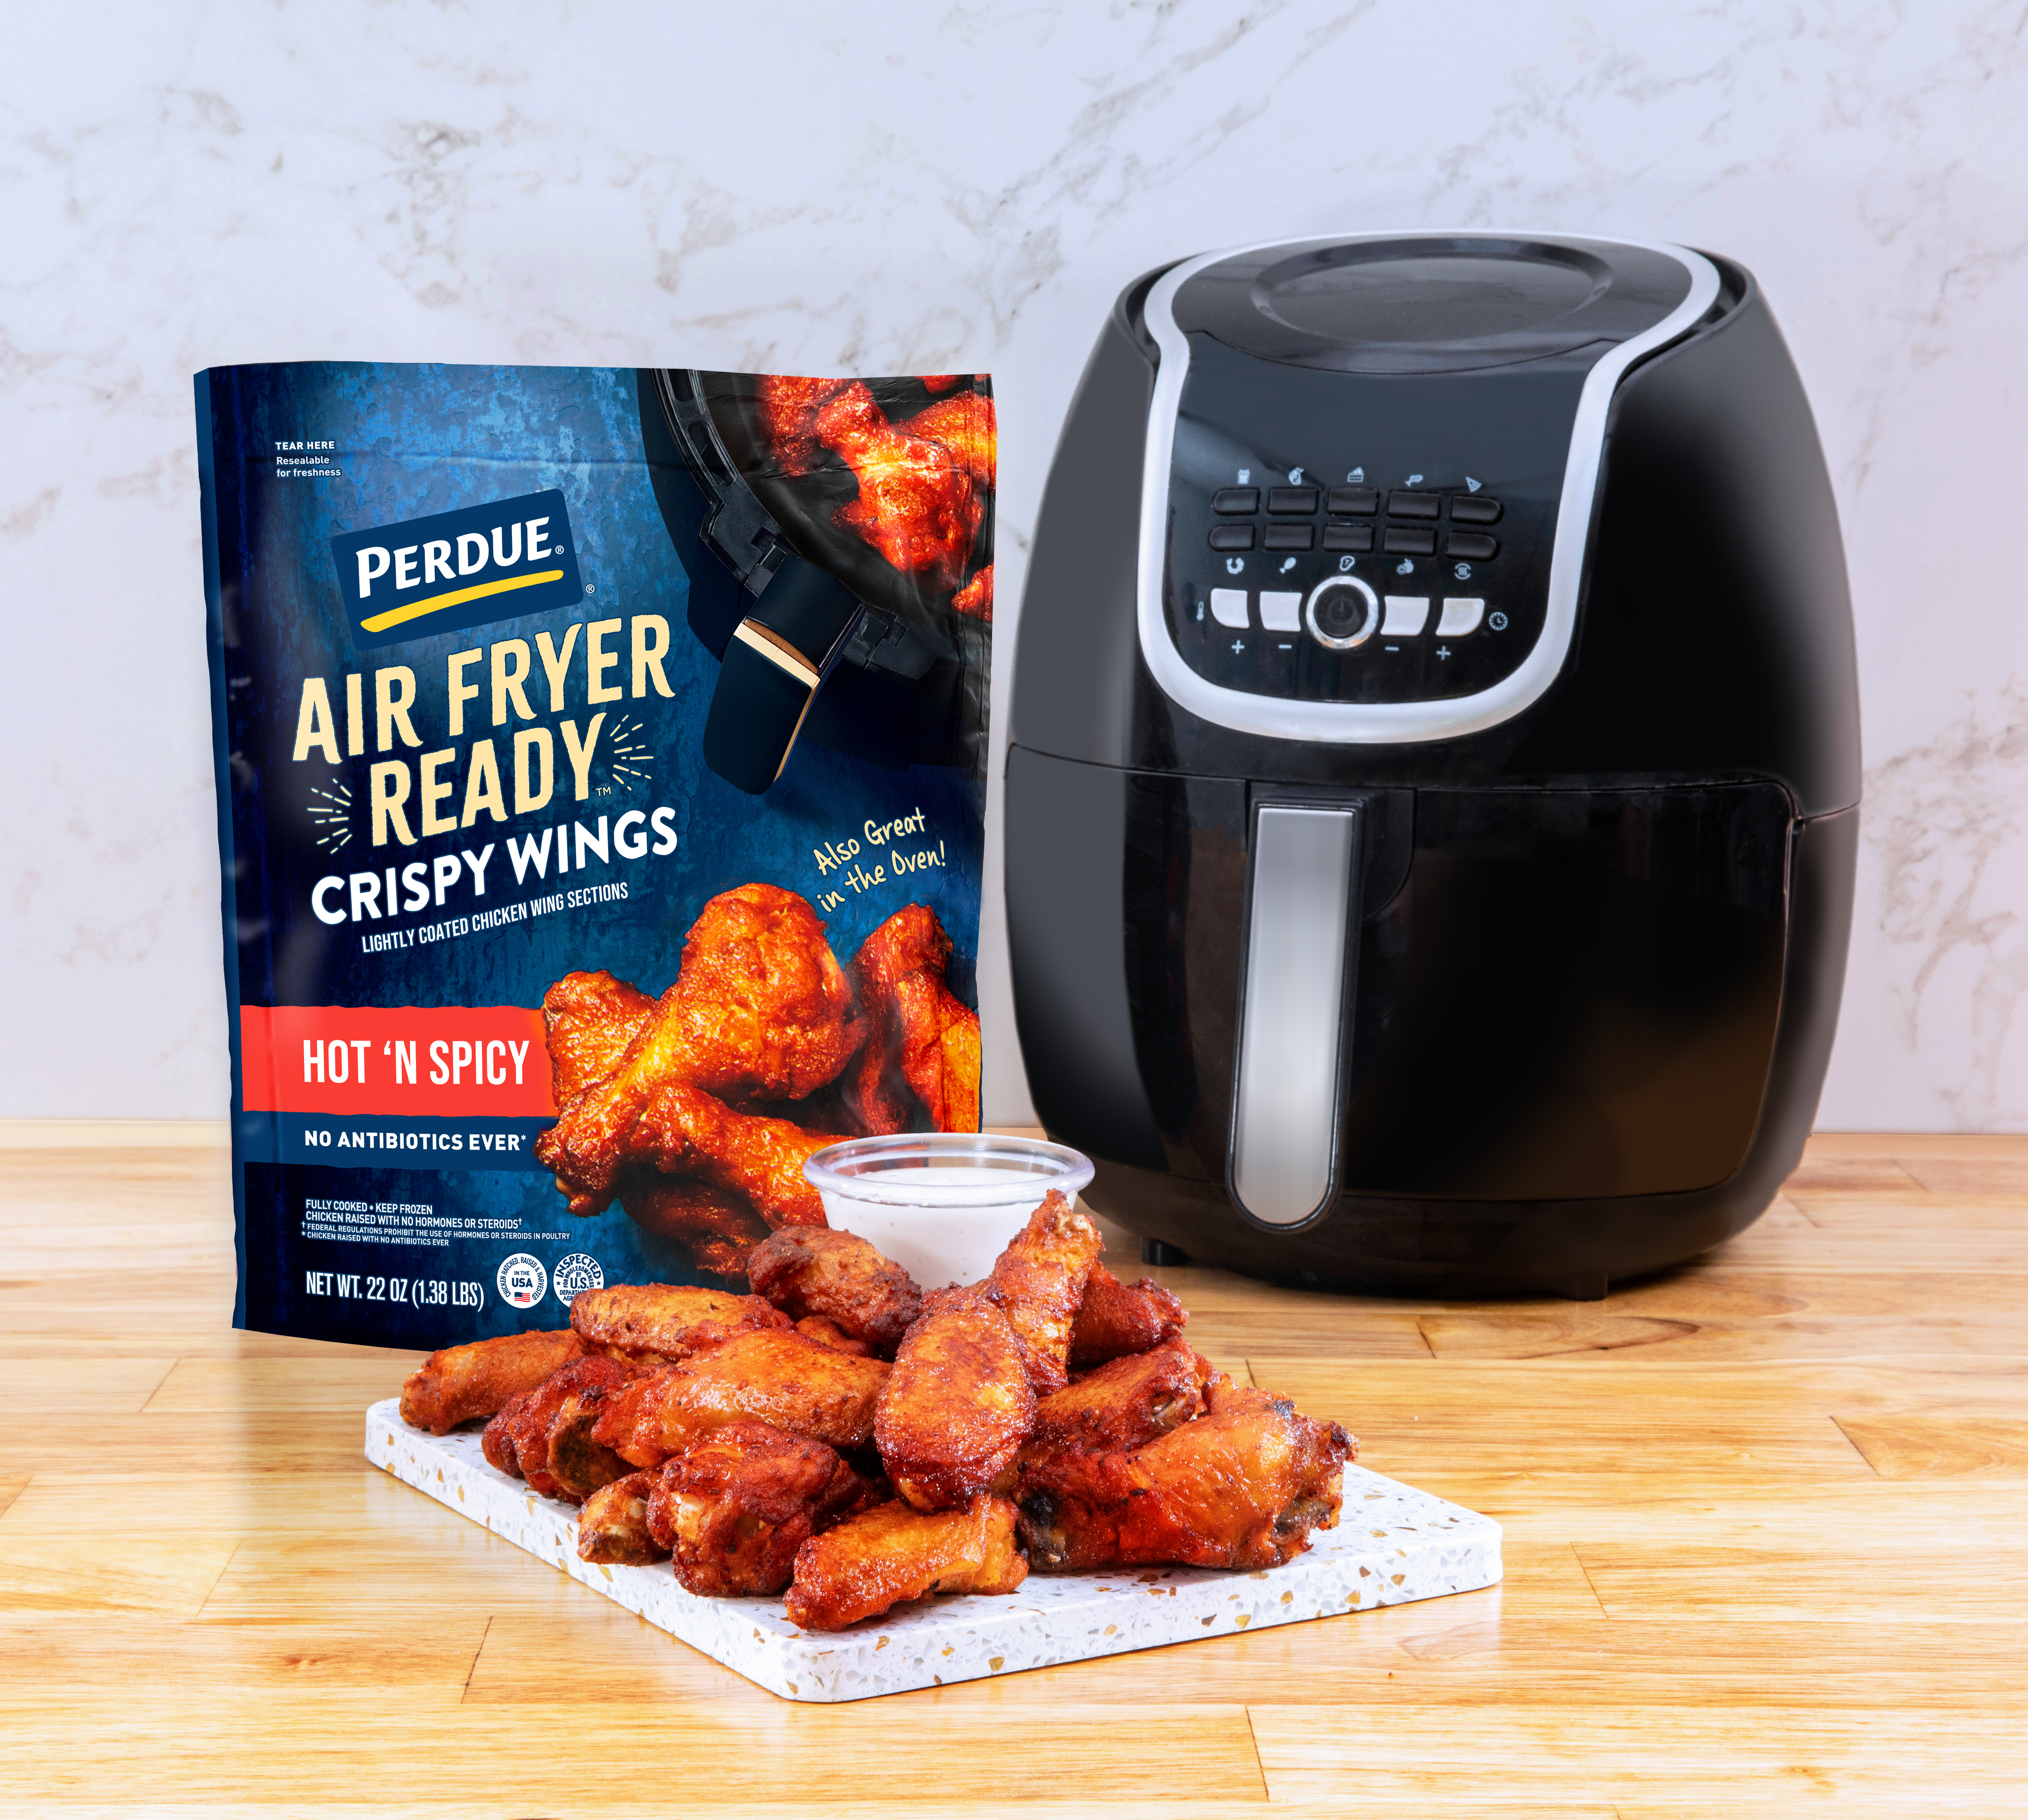 https://www.perdue.com/product-images/Hot_N_Spicy_Bag_Product_and_Air_Fryer_In_Kitchen.jpg